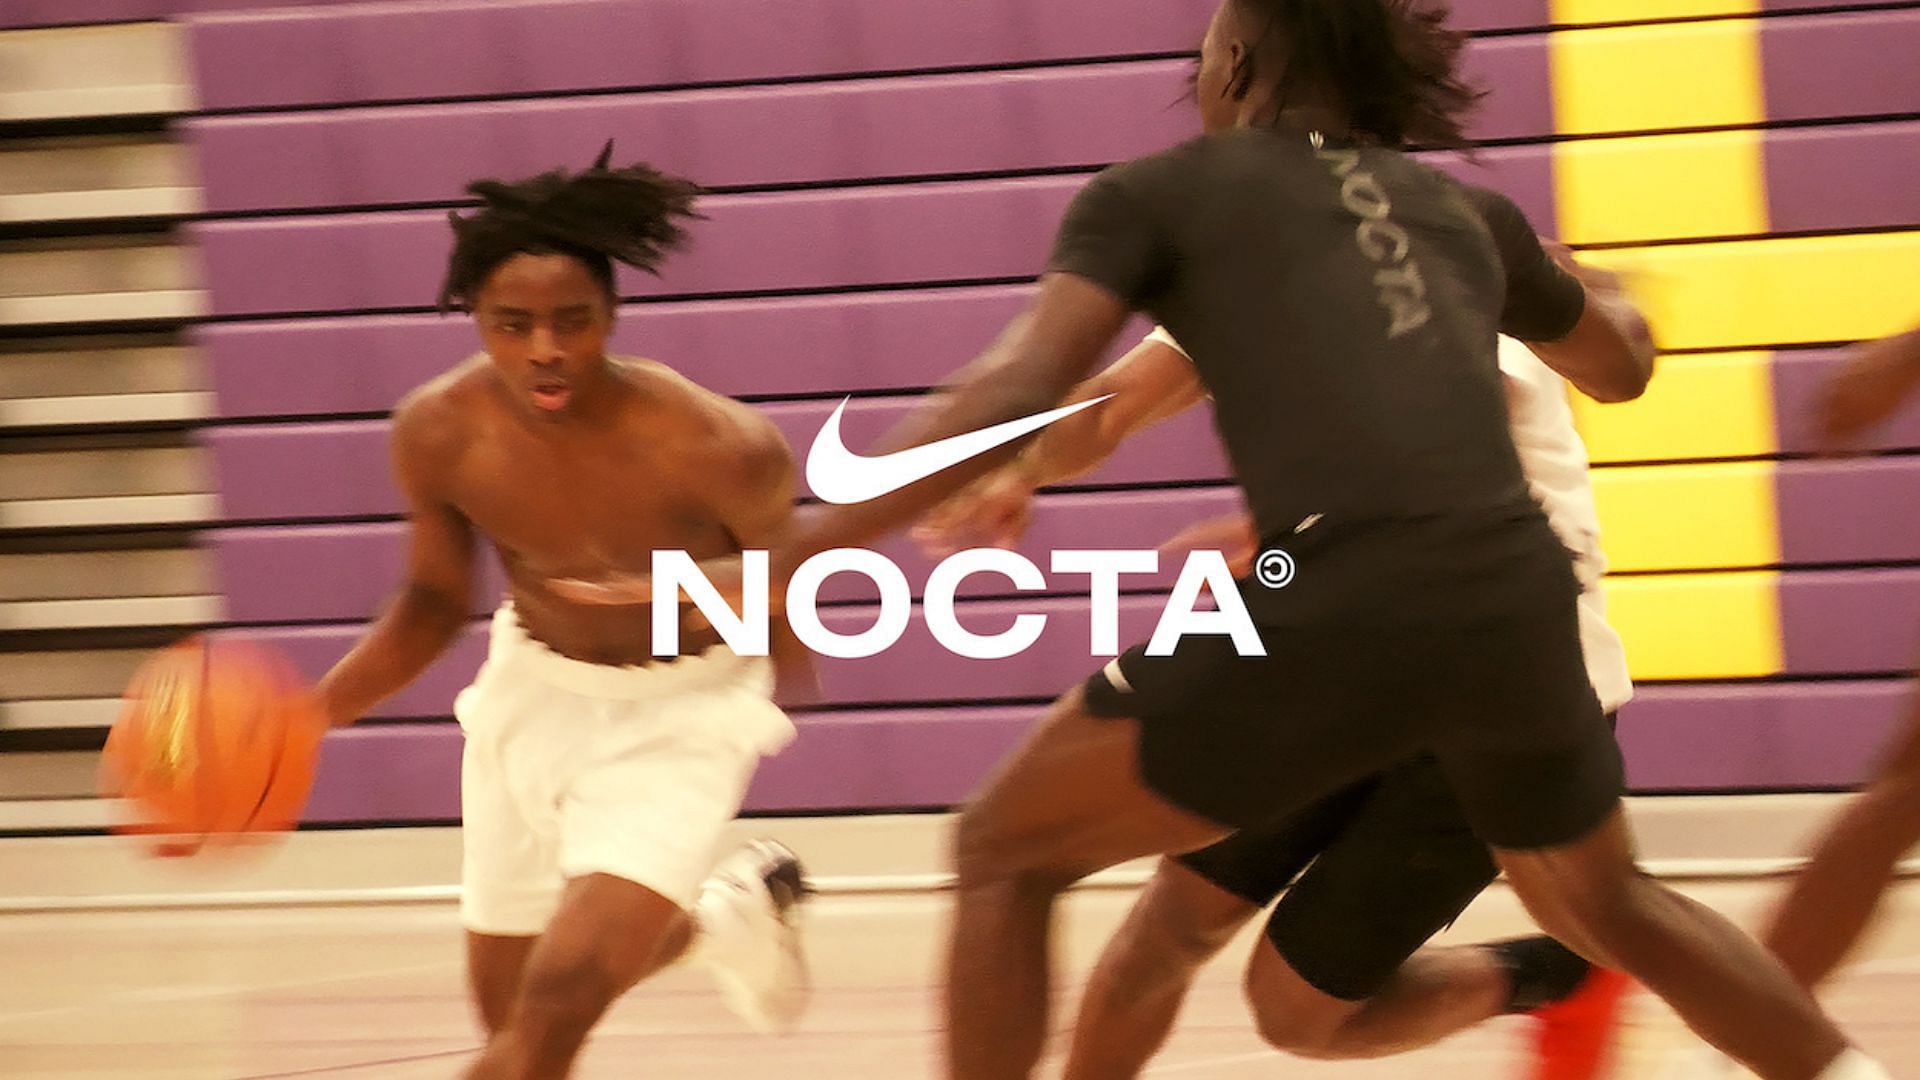 Drake Nike Nocta Basketball Collection (2022): Details, Where to Buy